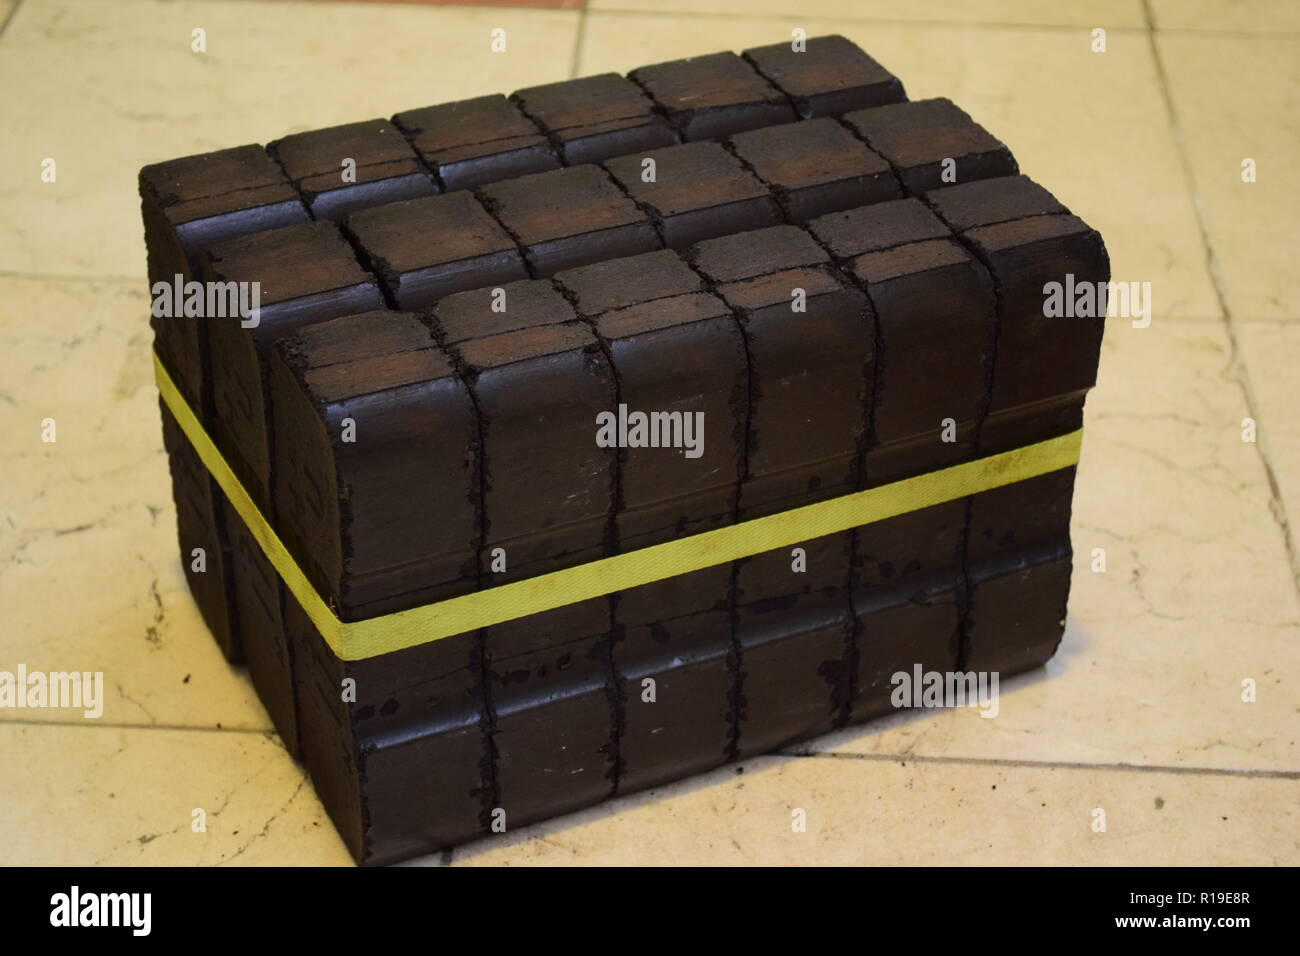 Brown coal briquette stockpile as an alternate heating source for fireplace or even for an solid fuel oven heating the whole house. Stock Photo